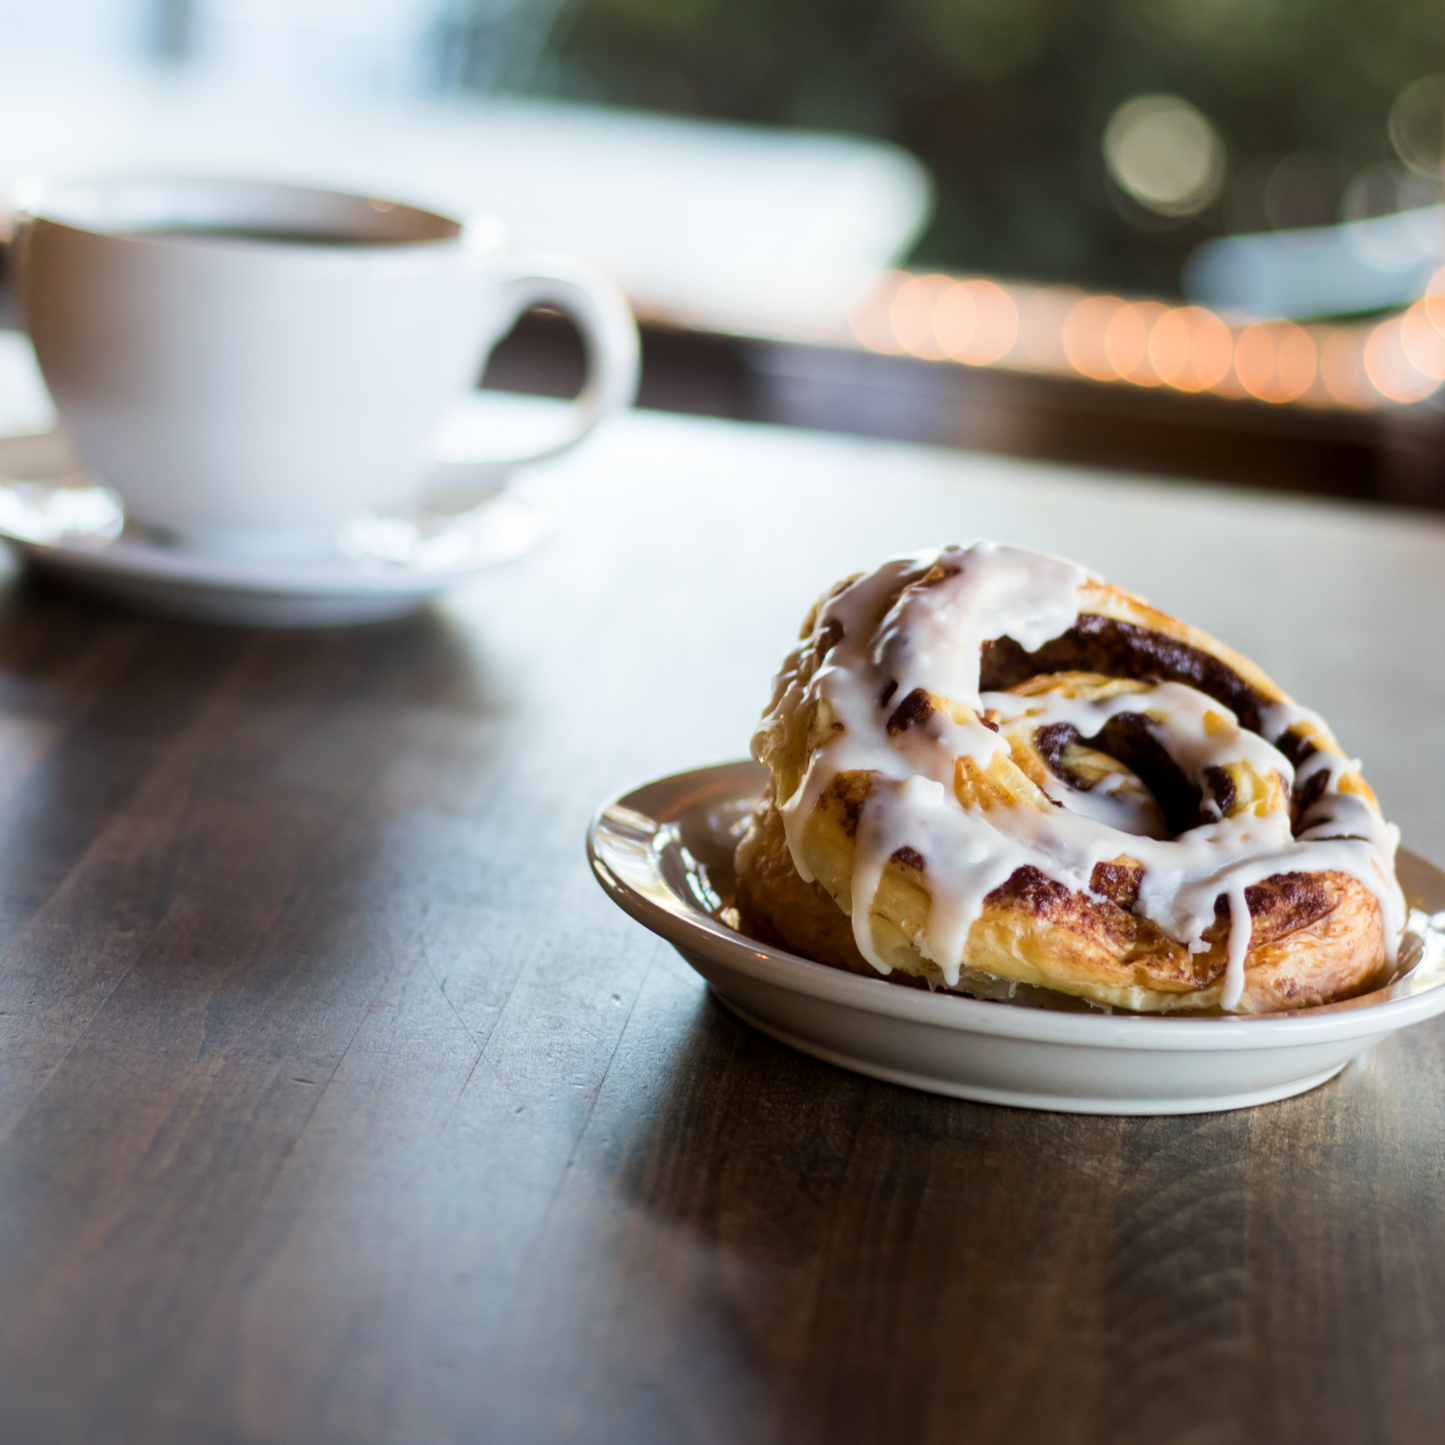 "Calorie-Free Delight: Indulge in Iced Cinnamon Roll Flavored Coffee | No Added Sugar or Calories!"